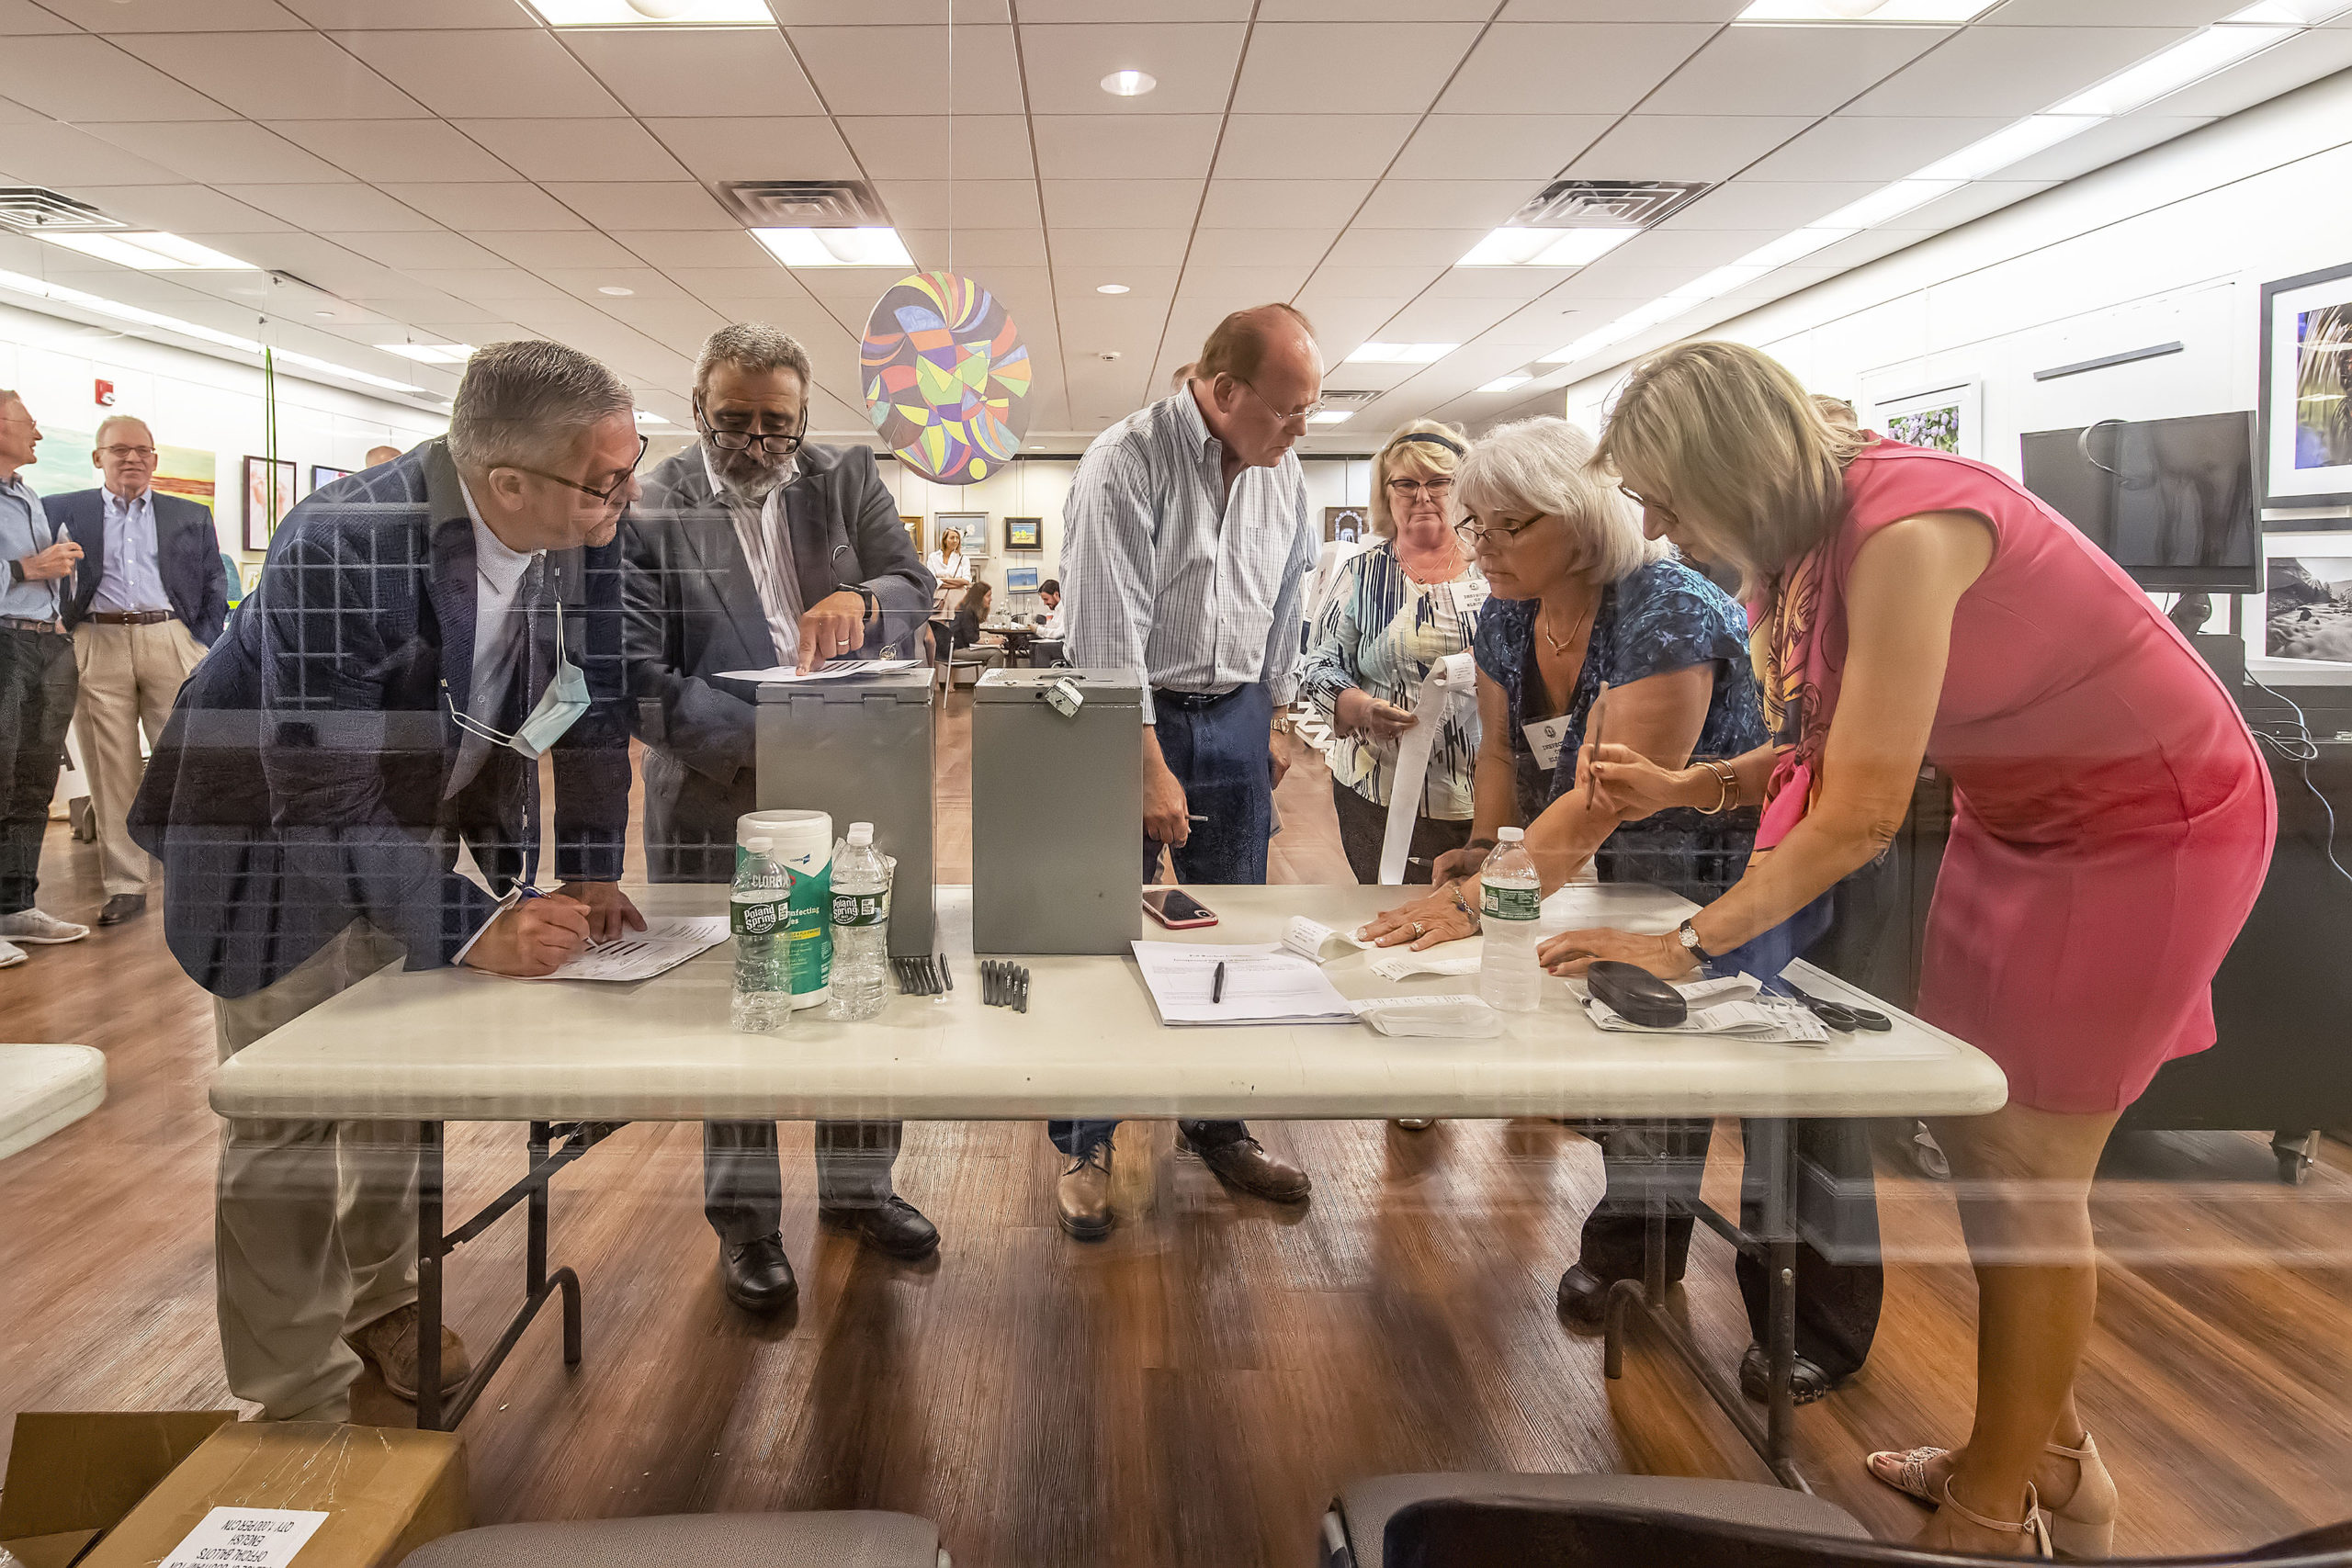 The vote count from each of the voting machines is tabulated during the 2021 Southampton Village Mayoral election at the Southampton Cultural Center on Friday night. MICHALE HELLER